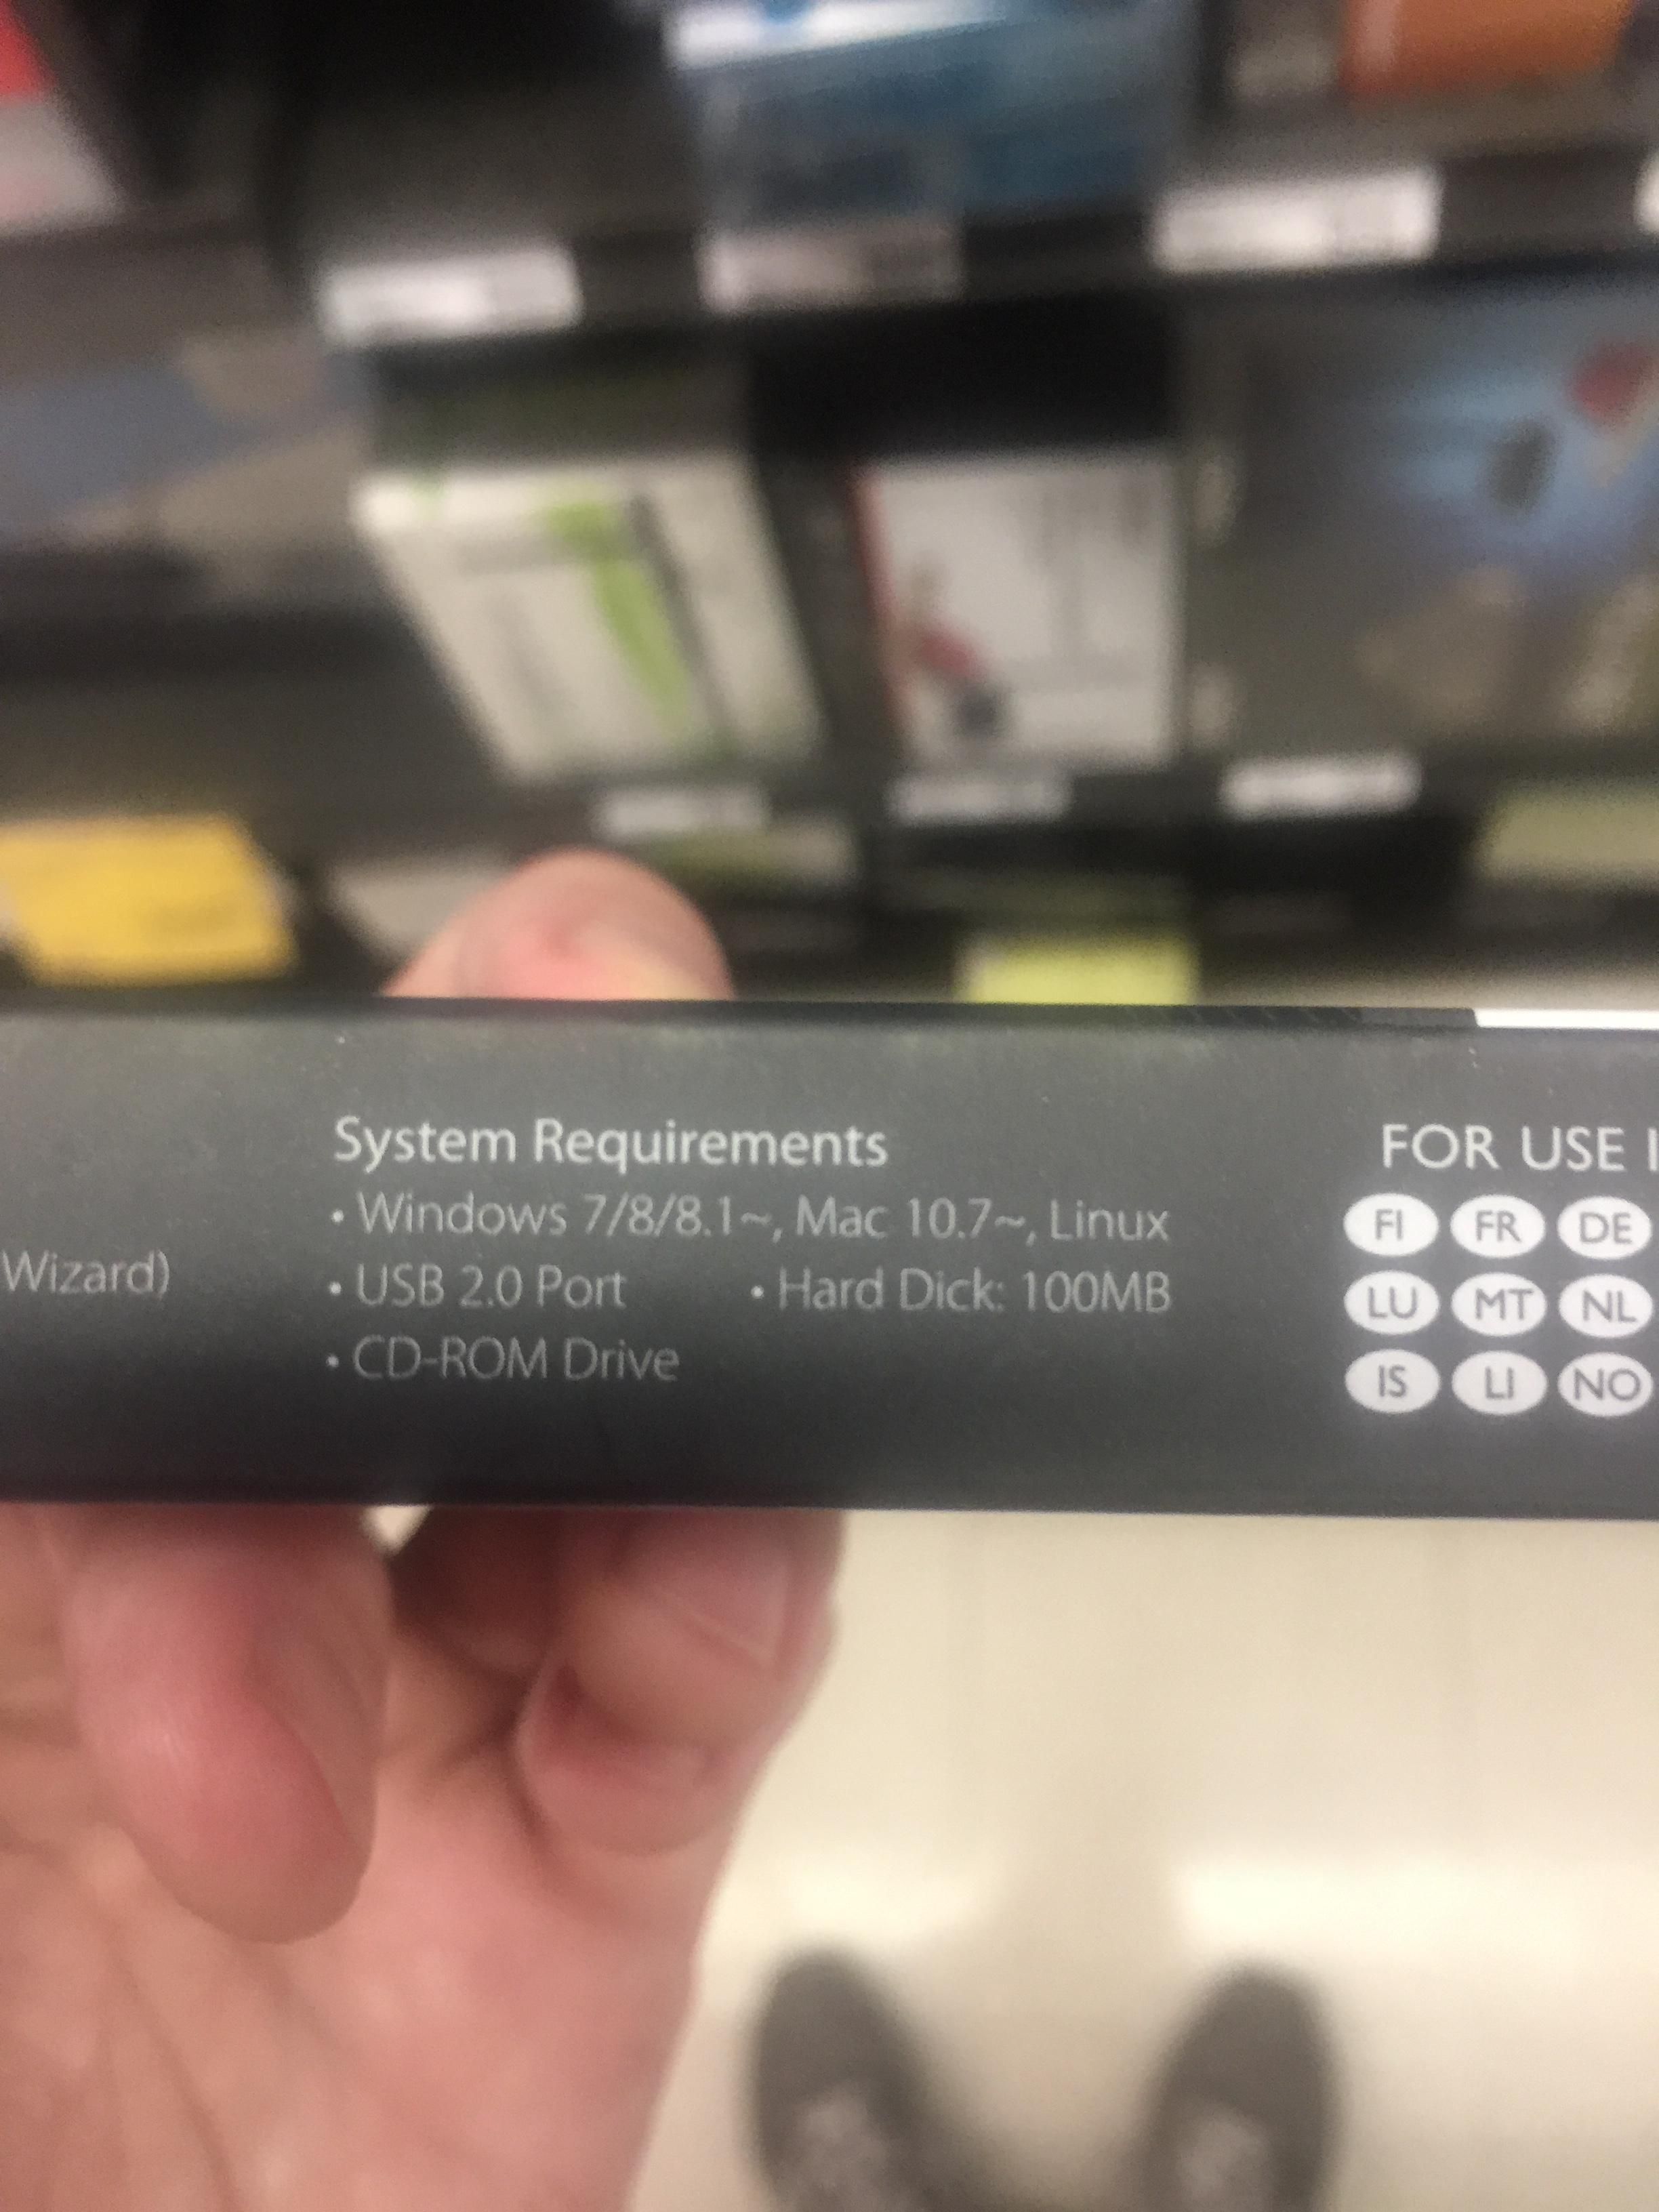 System Requirements.